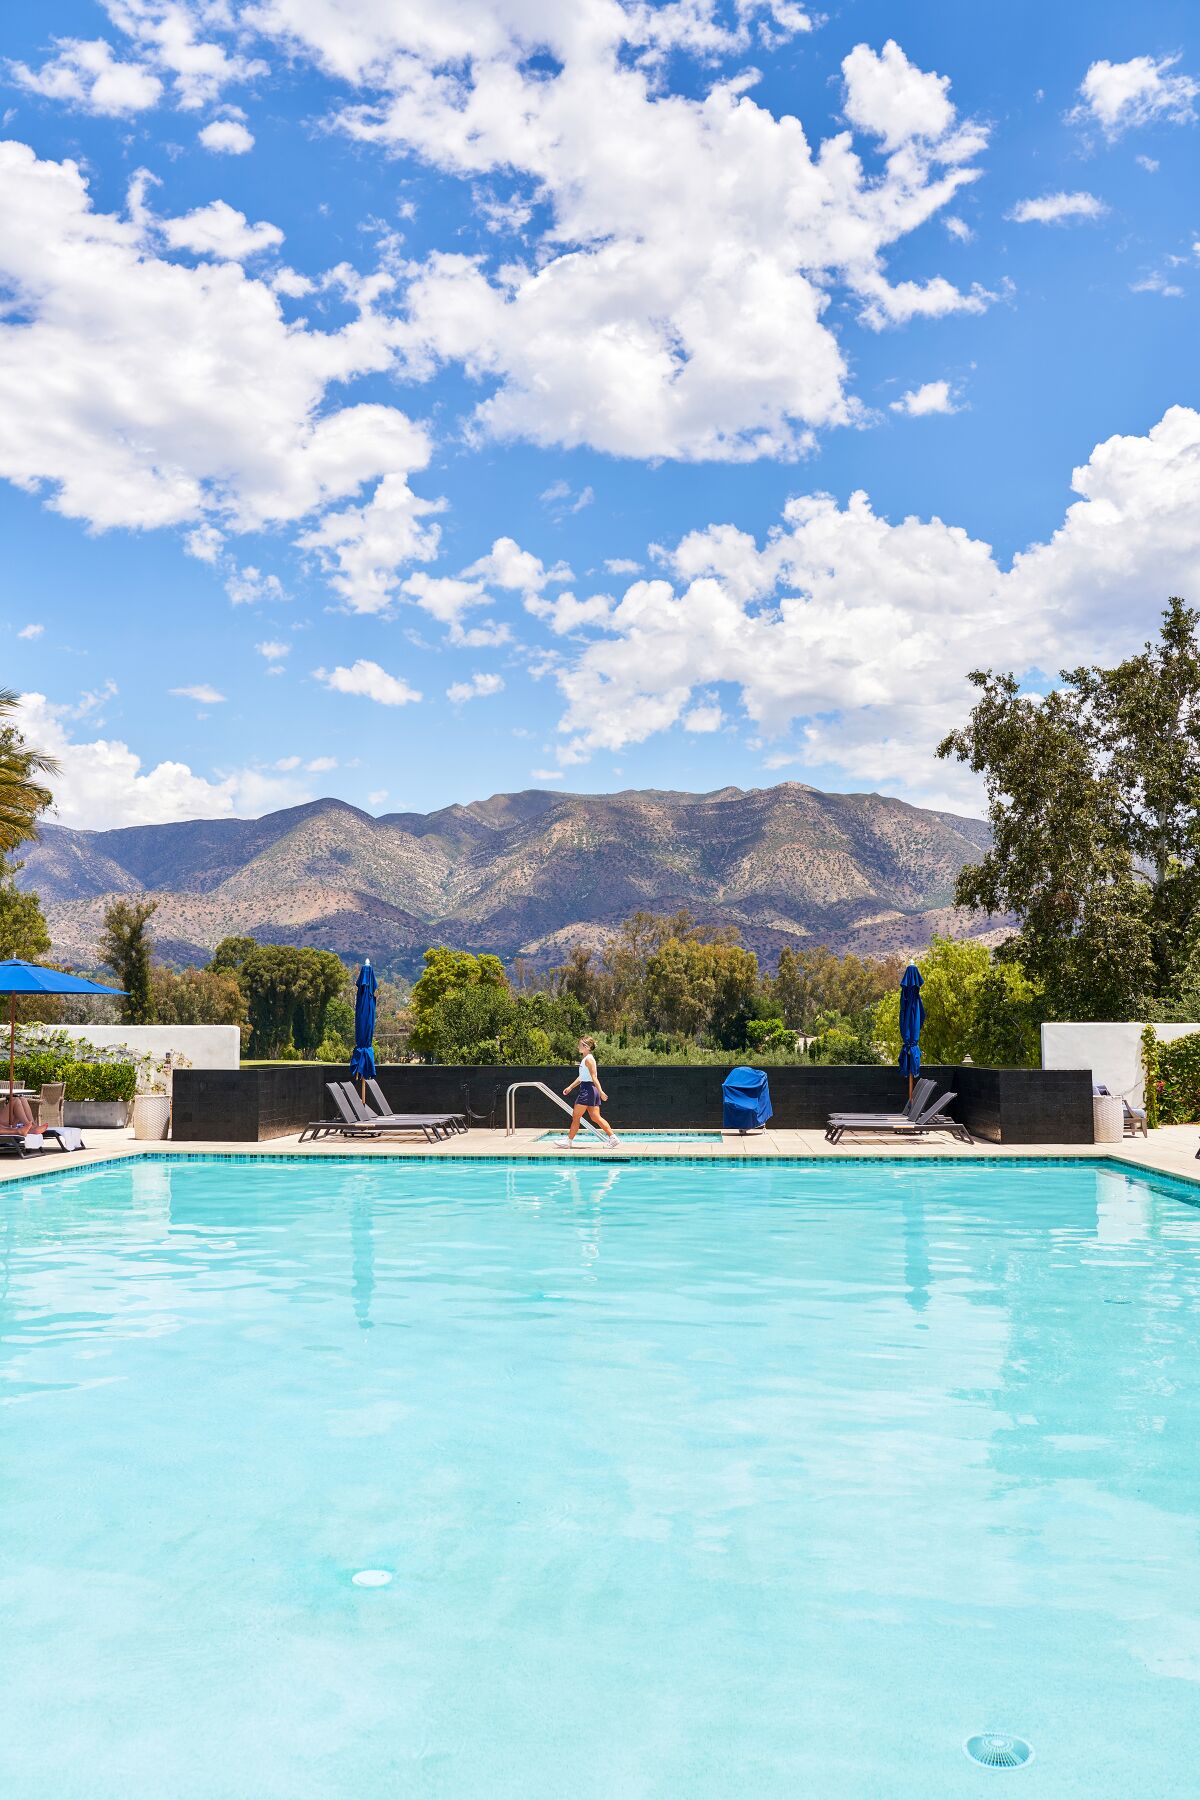 A view of the mountains from the pool at the Ojai Valley Inn, in Ojai, Calif.